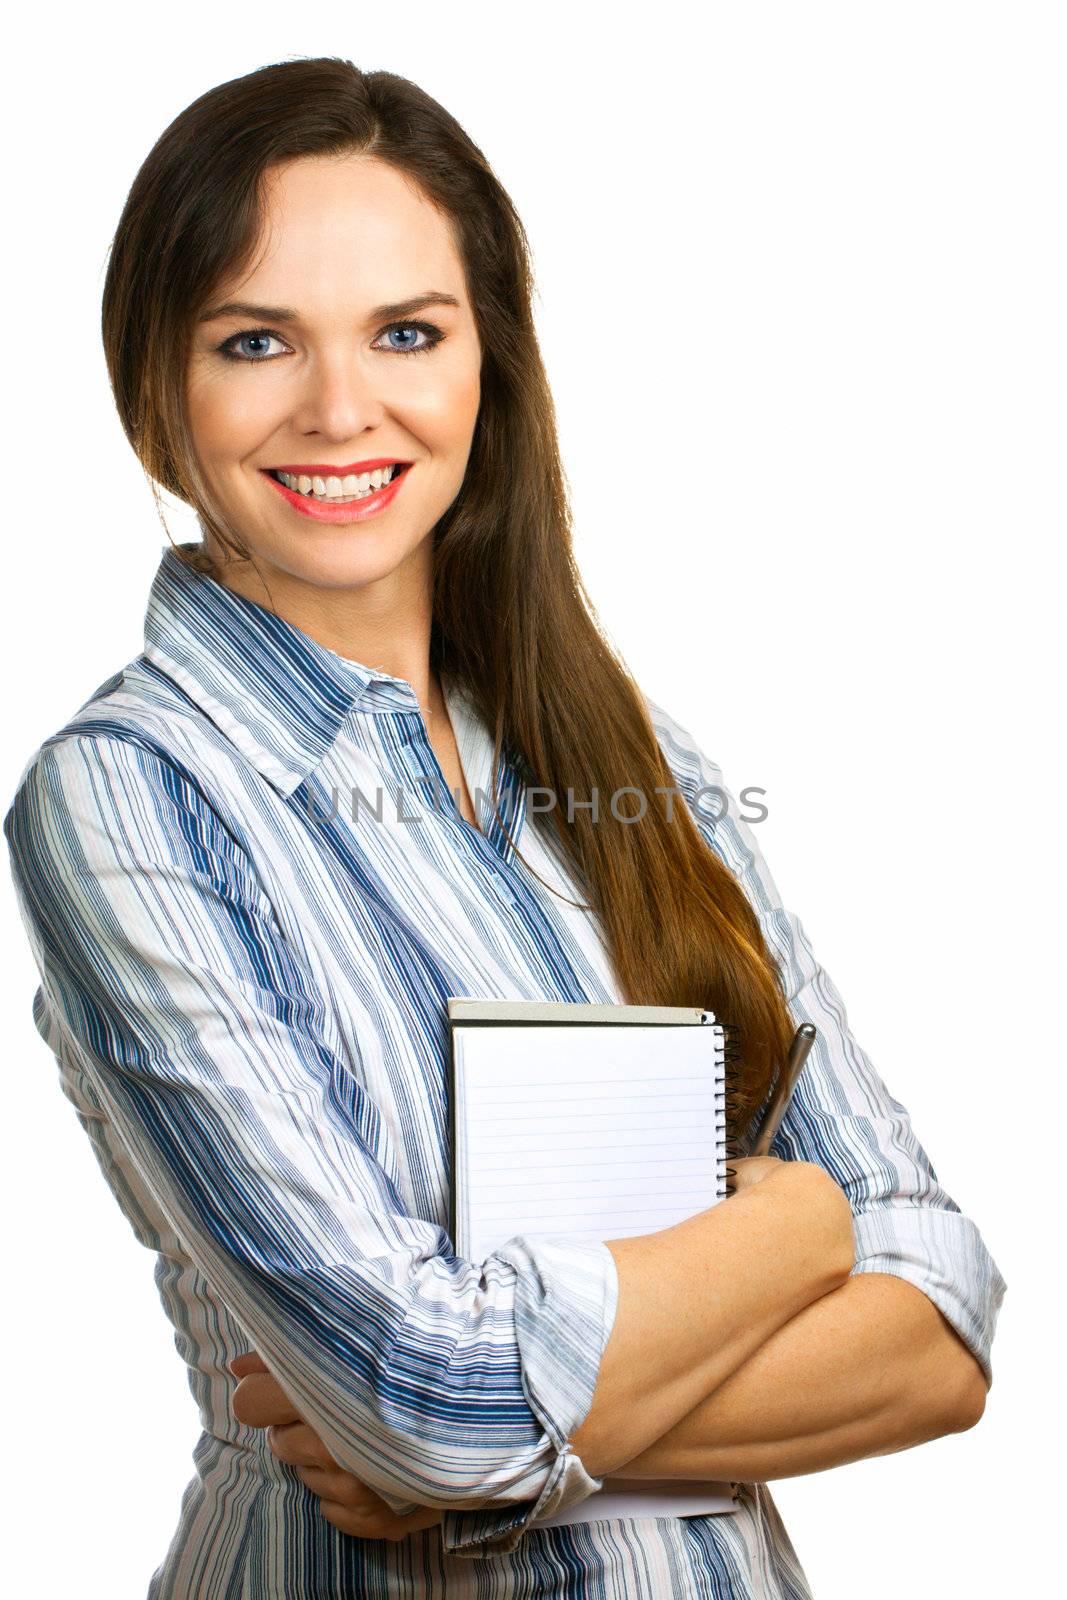 A portrait of a beautiful confident business woman smiling and holding a note pad and pen. Isolated over white.